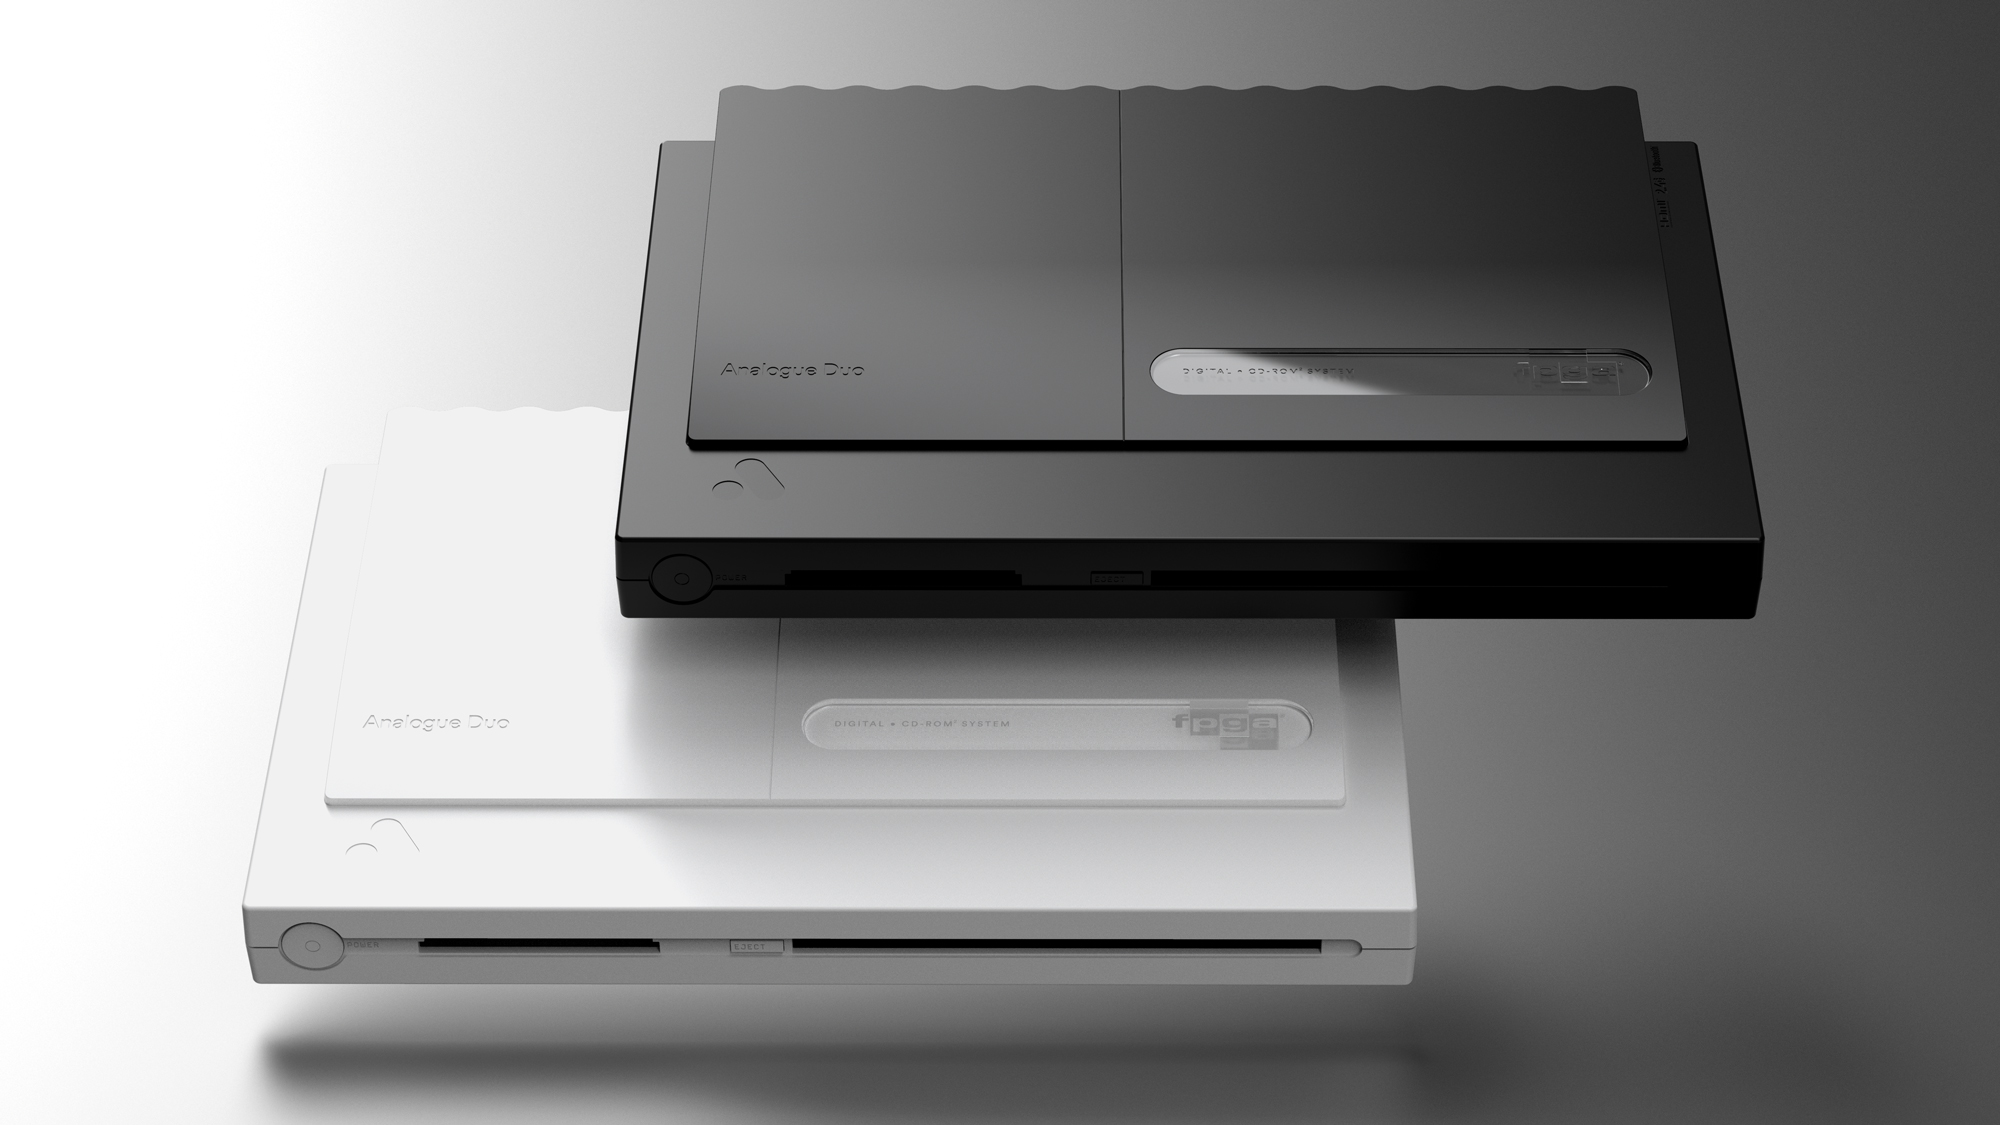 The Analogue Duo, based on the design of the NEC TurboDuo, will be available in black or white sometime in 2021. (Image: Analogue)